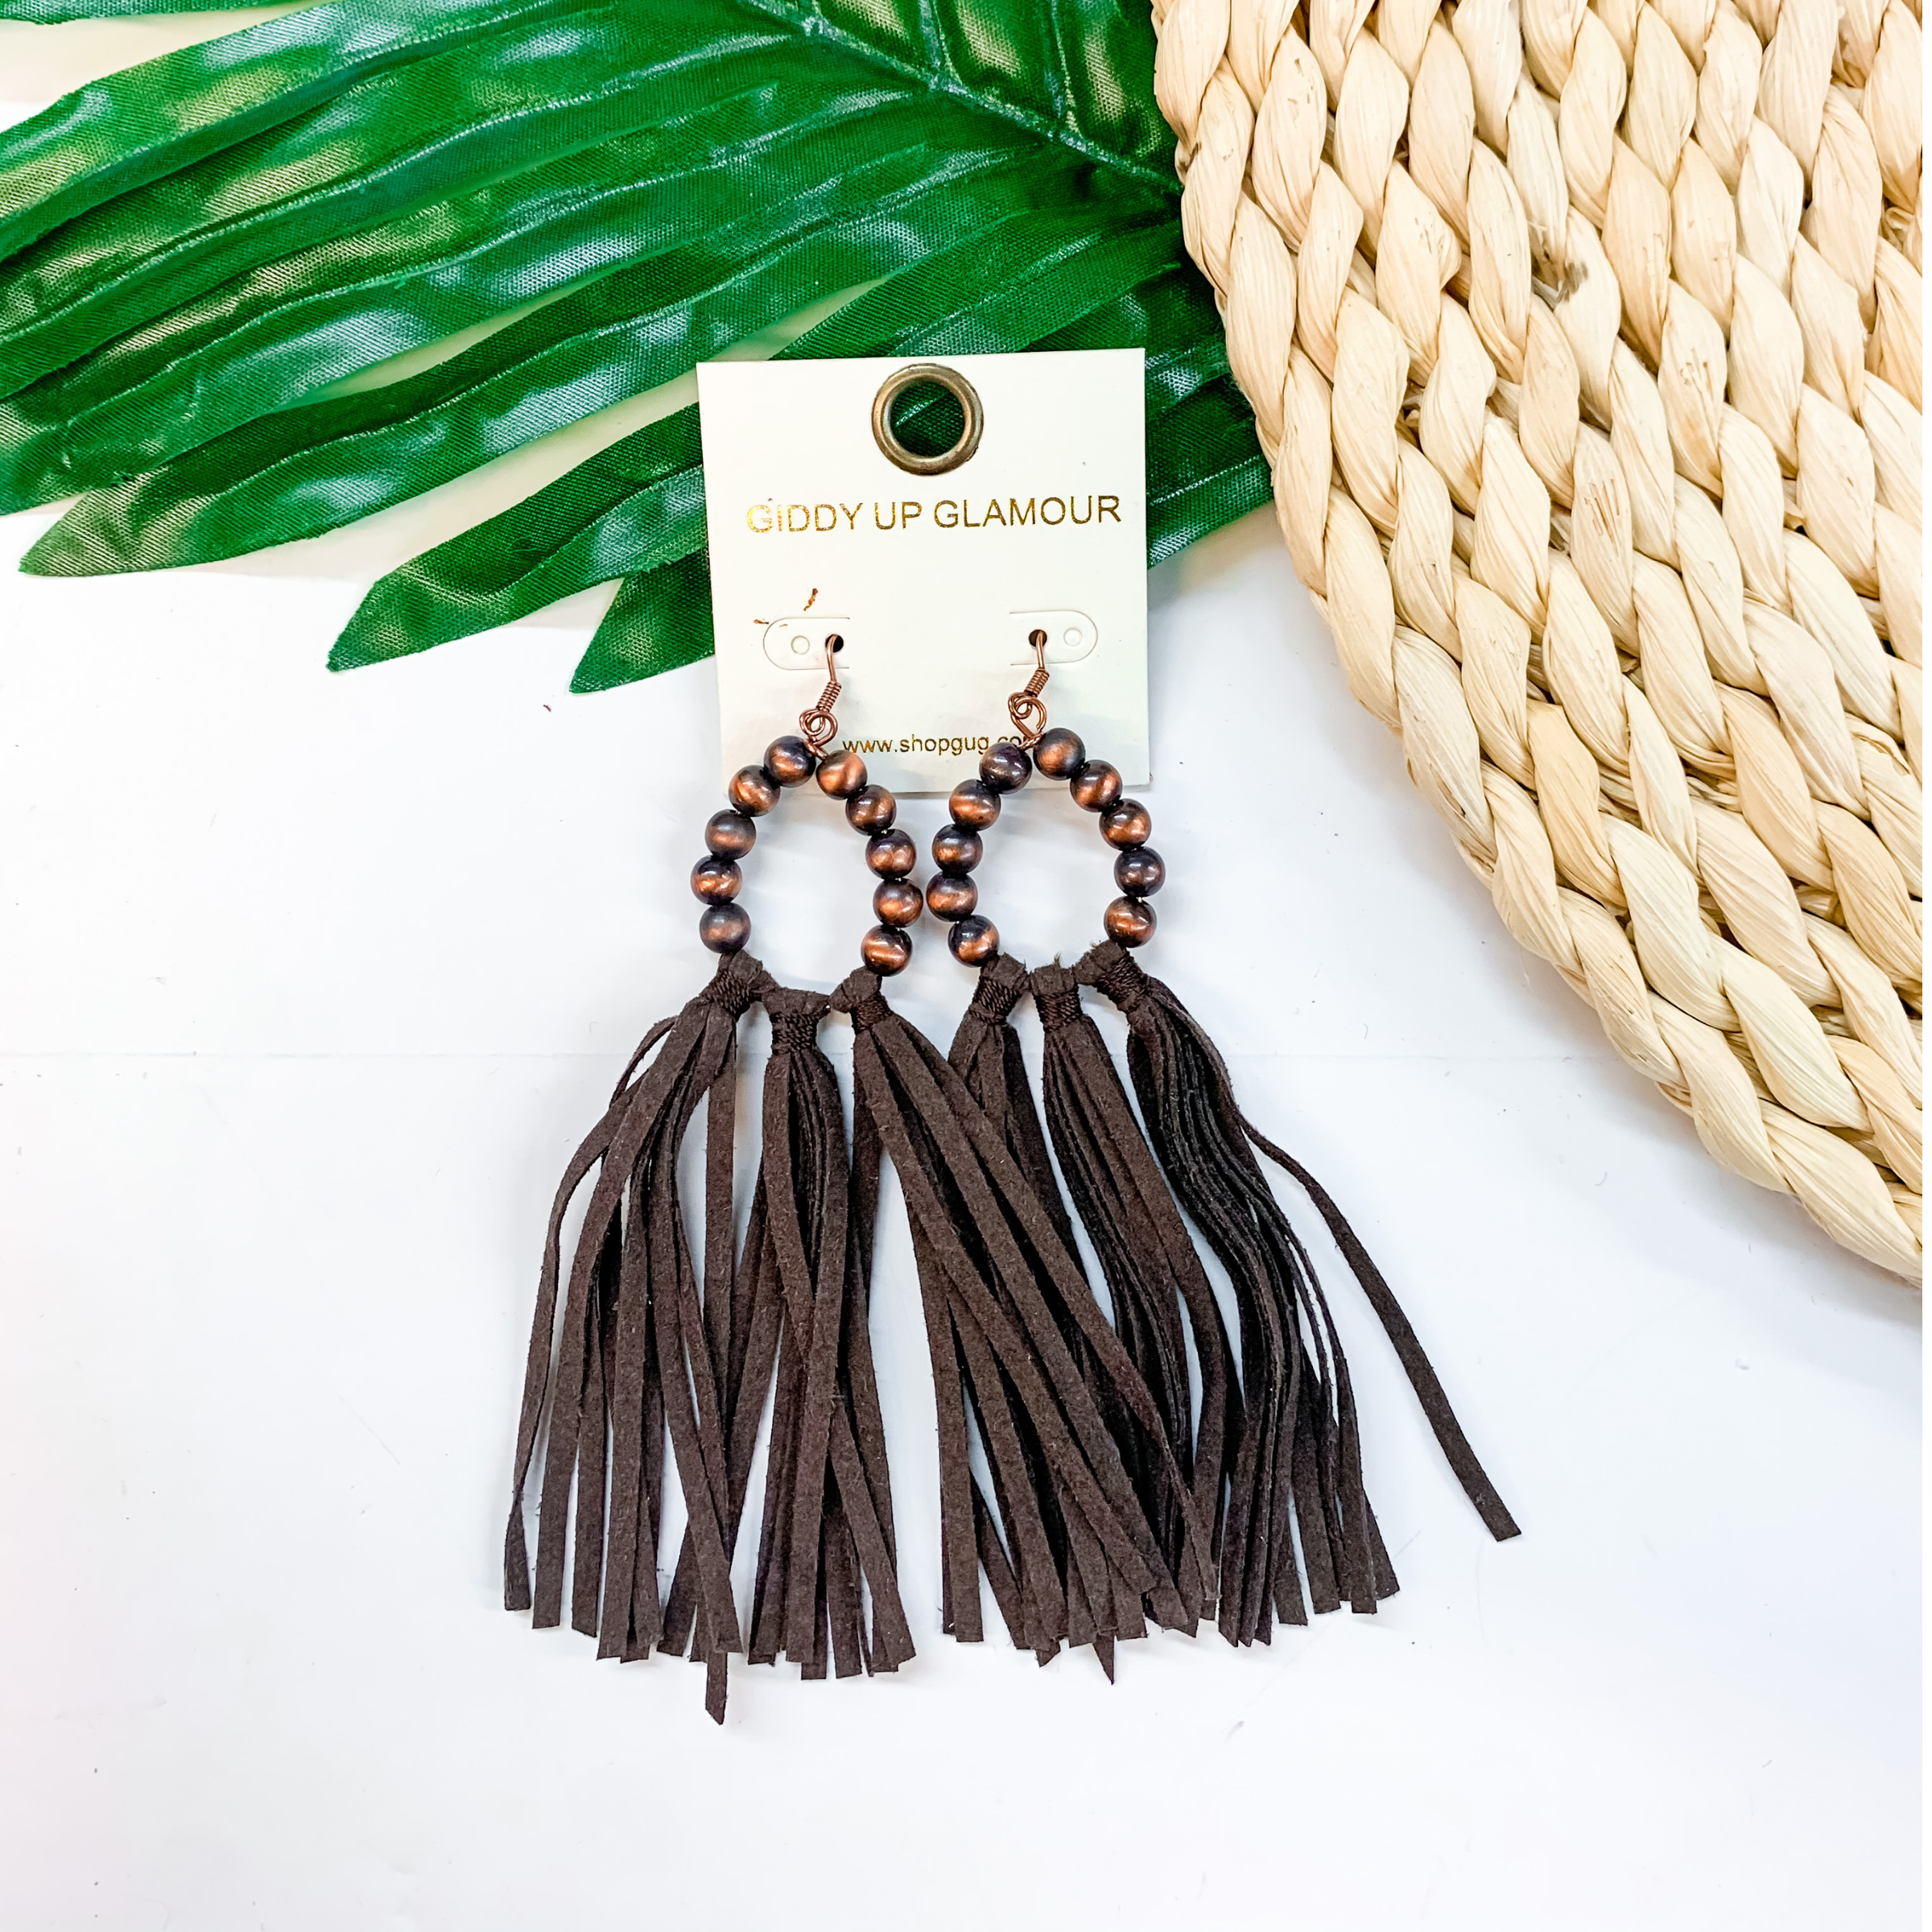 Feelin' Fabulous Navajo Teardrop Earrings With Leather Tassels in Copper Tone and Brown - Giddy Up Glamour Boutique